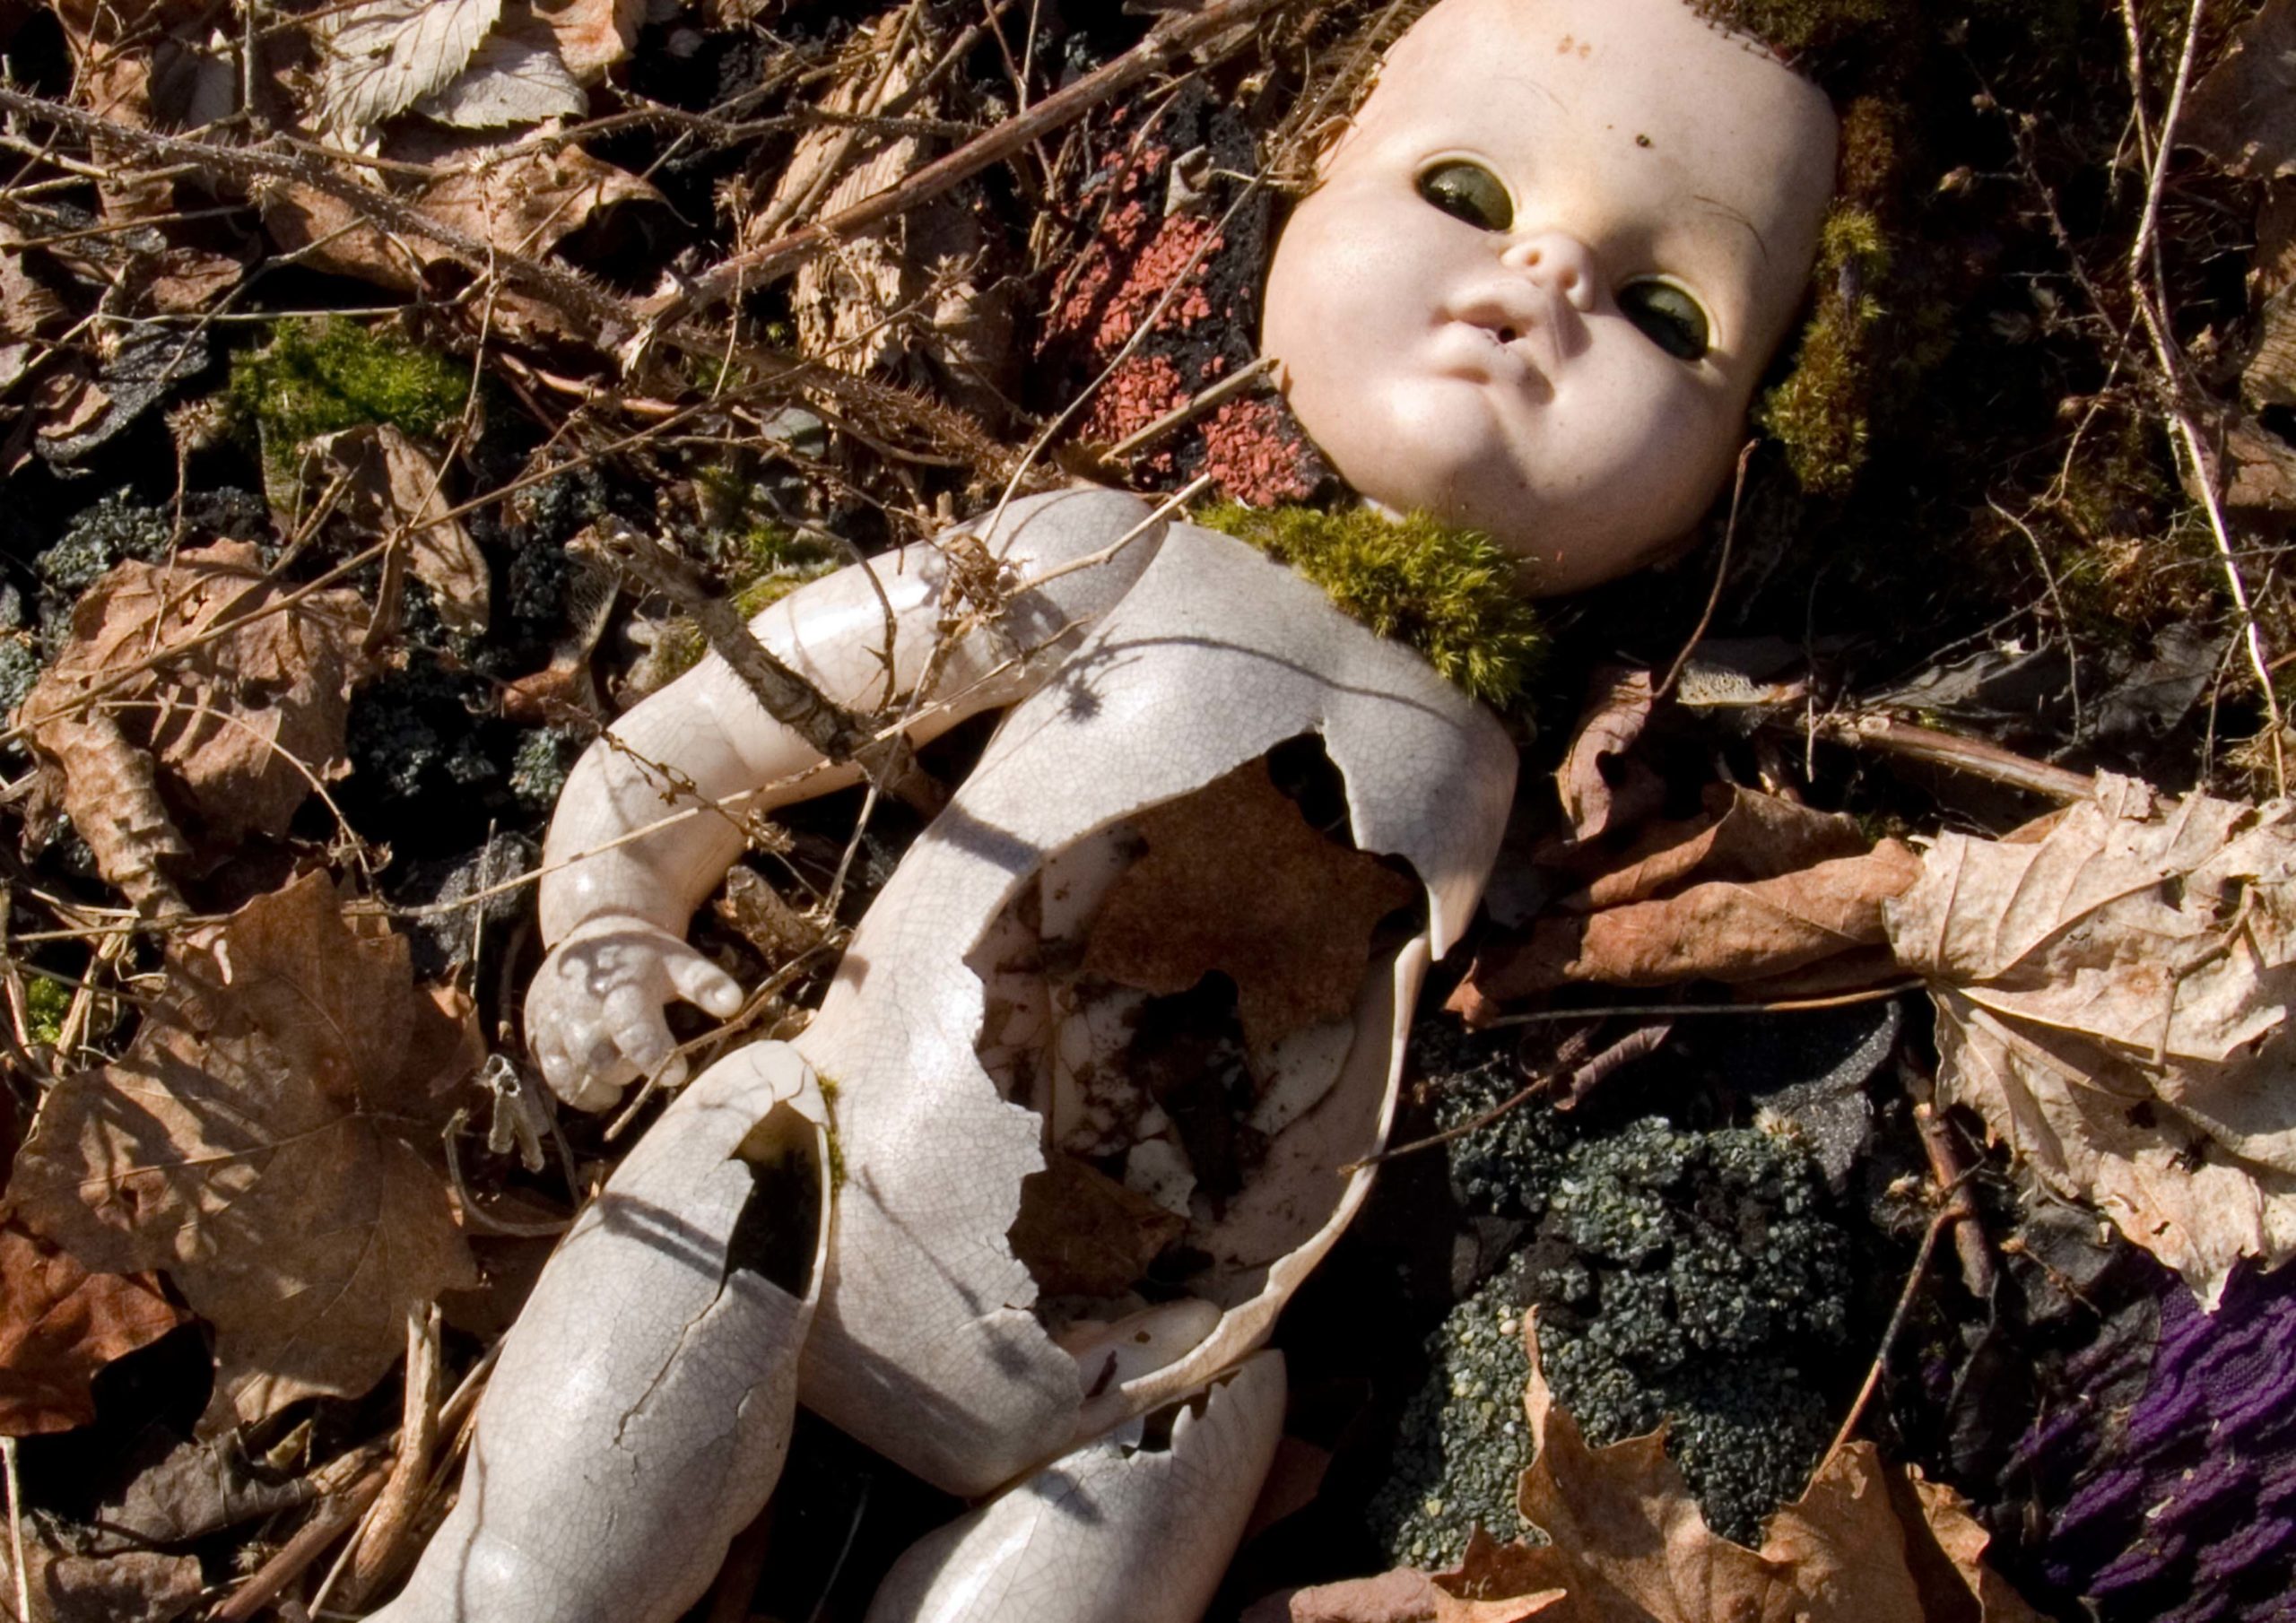 A baby doll, completely destroyed and broken, lays amongst a mess of dead leaves, twigs, and moss.